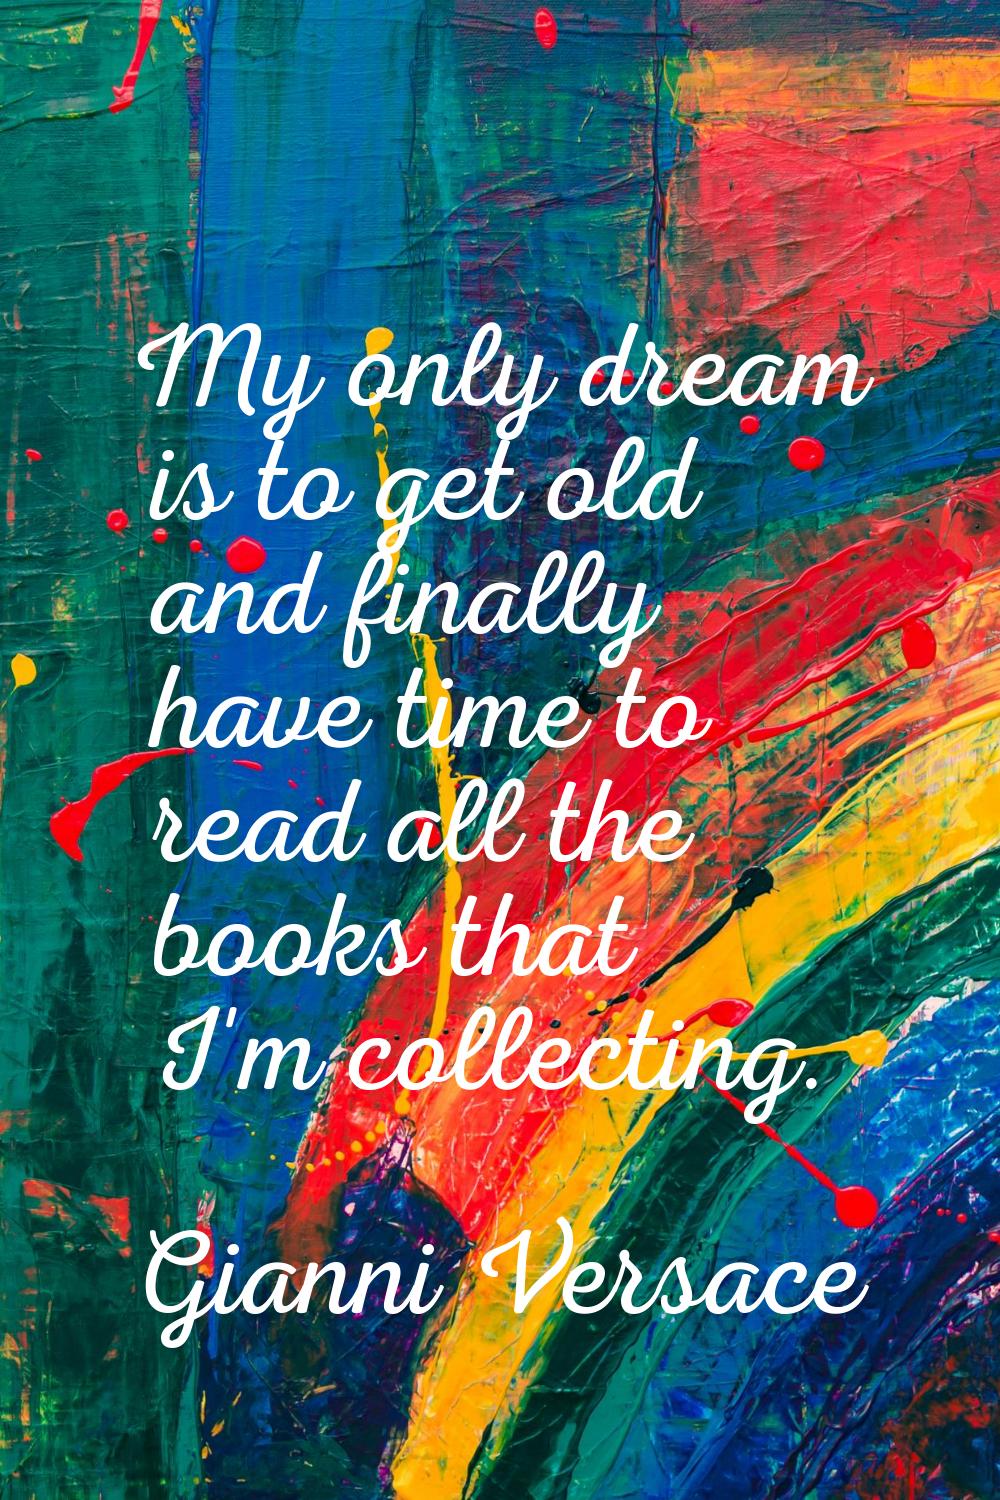 My only dream is to get old and finally have time to read all the books that I'm collecting.